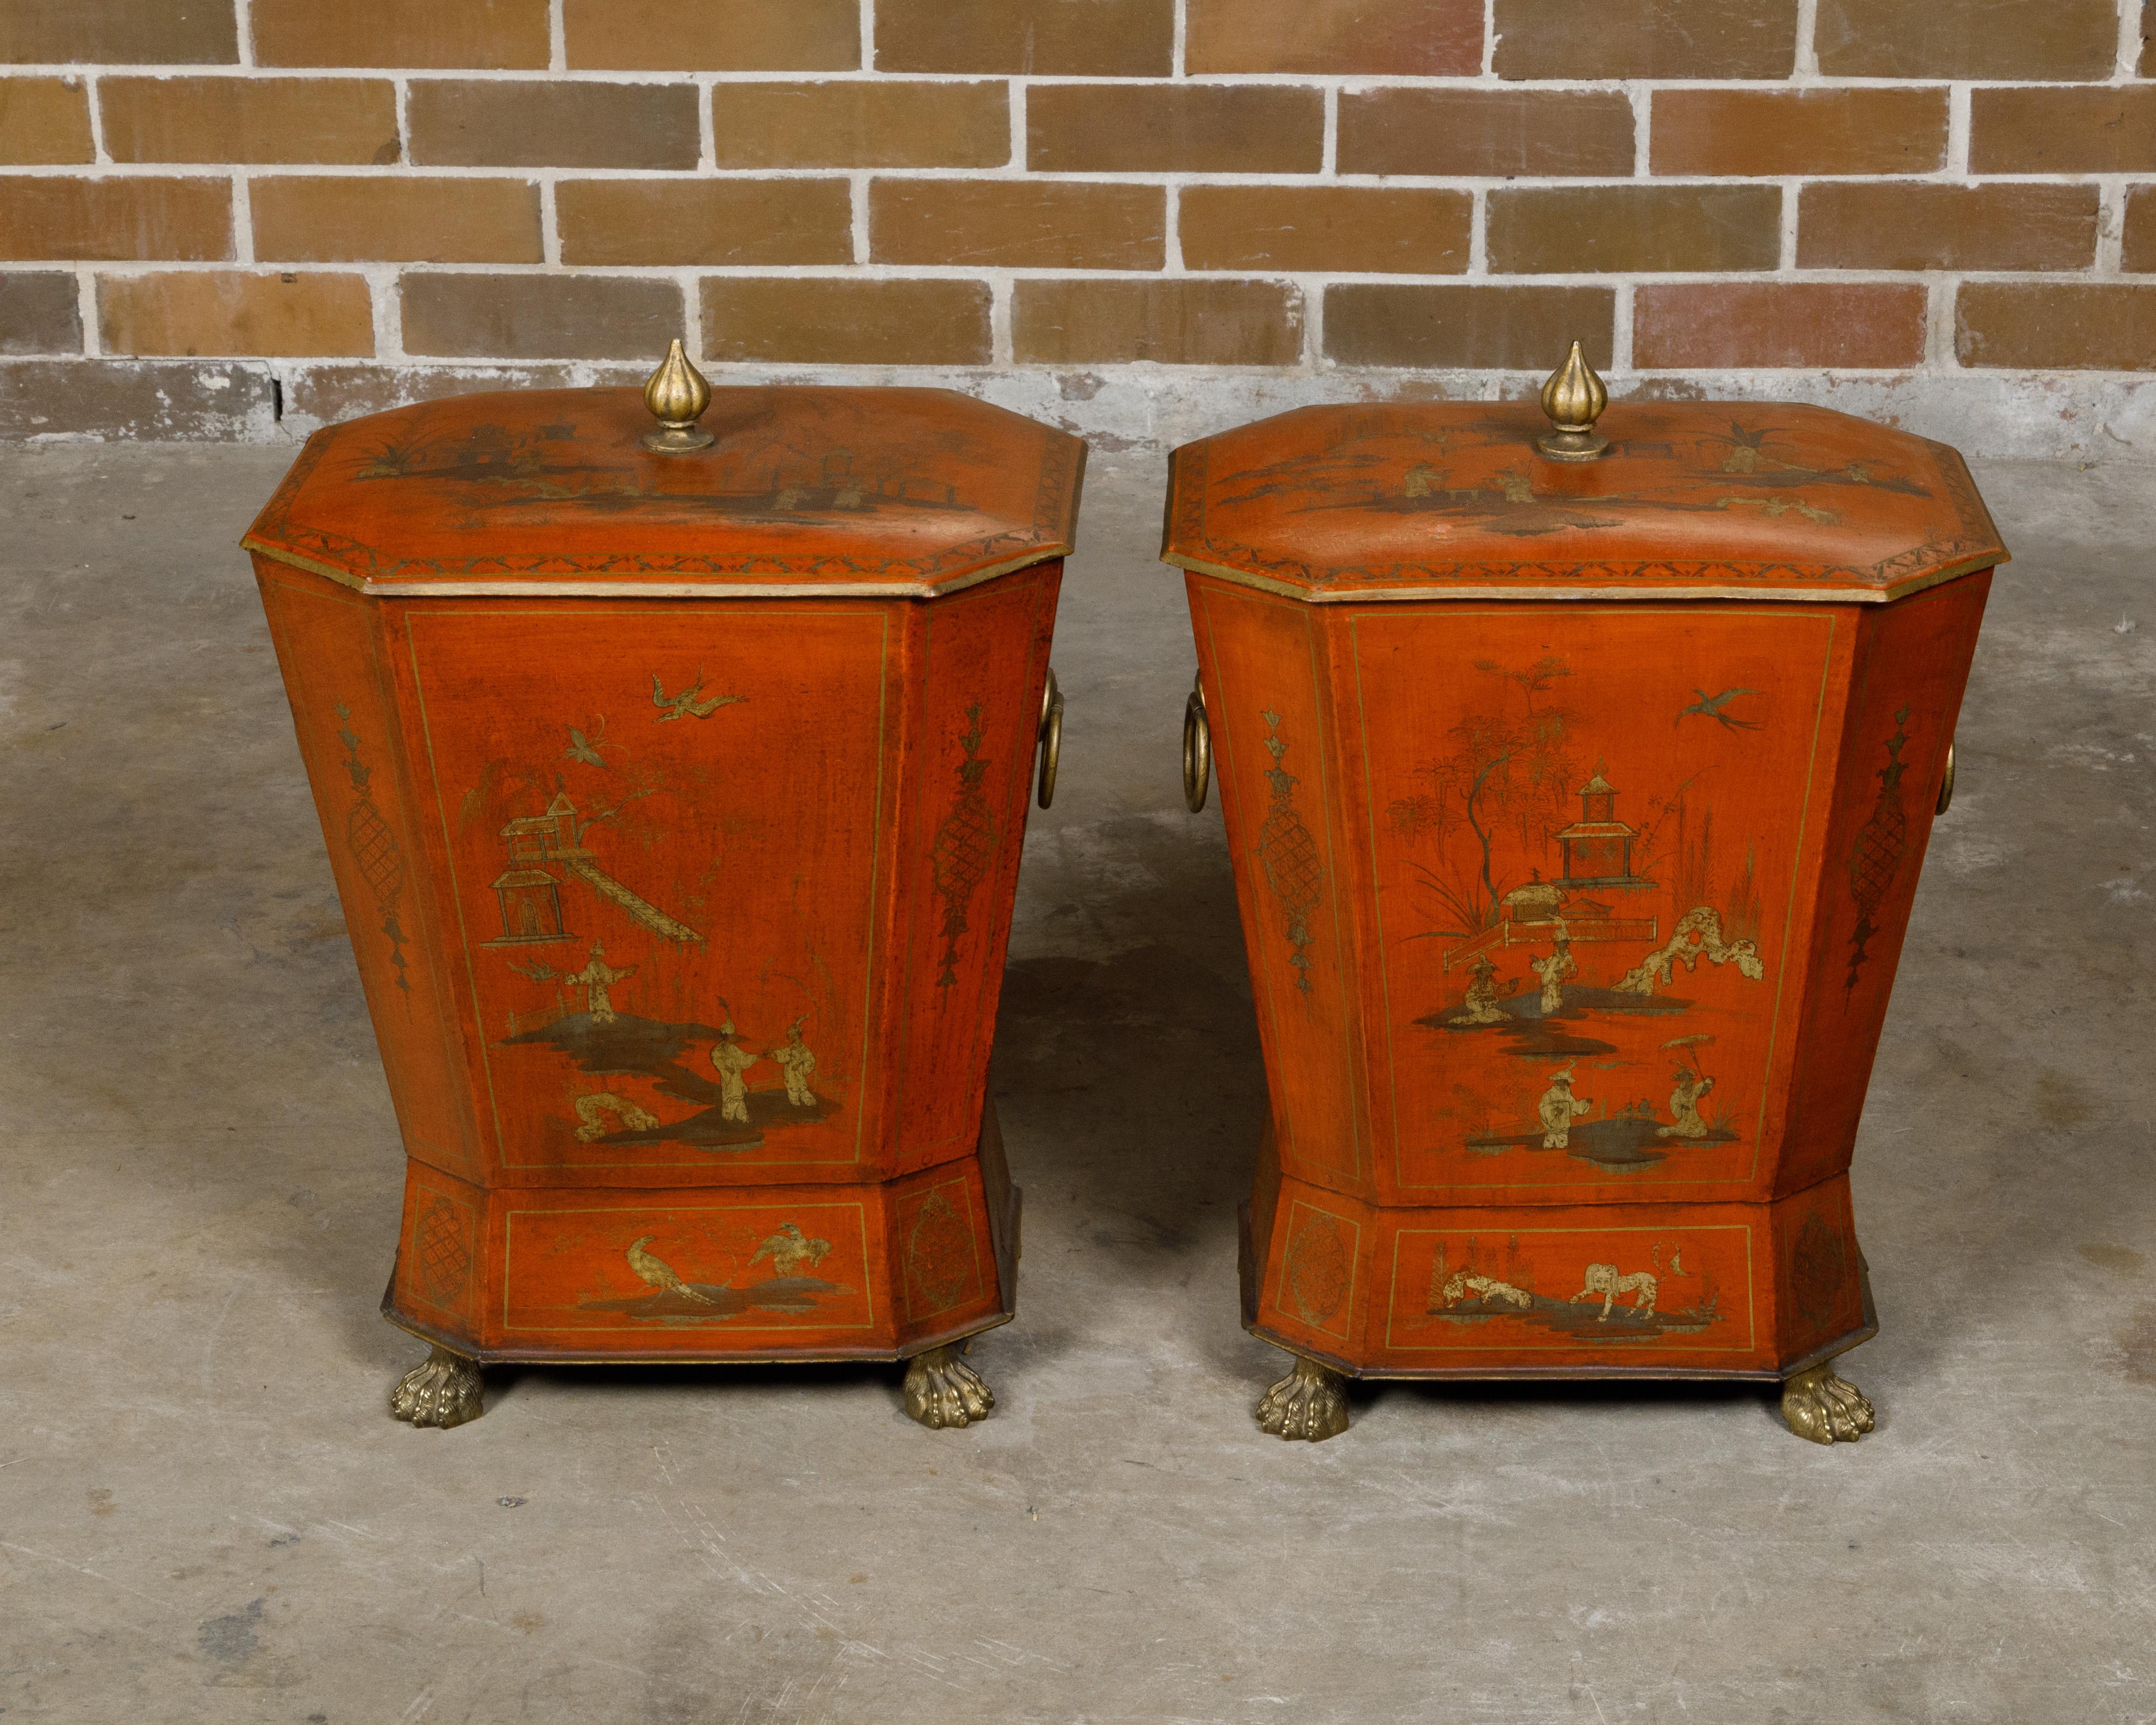 A pair of English Victorian period red lacquered tôle cellarettes from the 19th century with gilded Chinoiserie décor and lion paw feet. This exquisite pair of English Victorian period cellarettes captivates with its vibrant red lacquered finish and